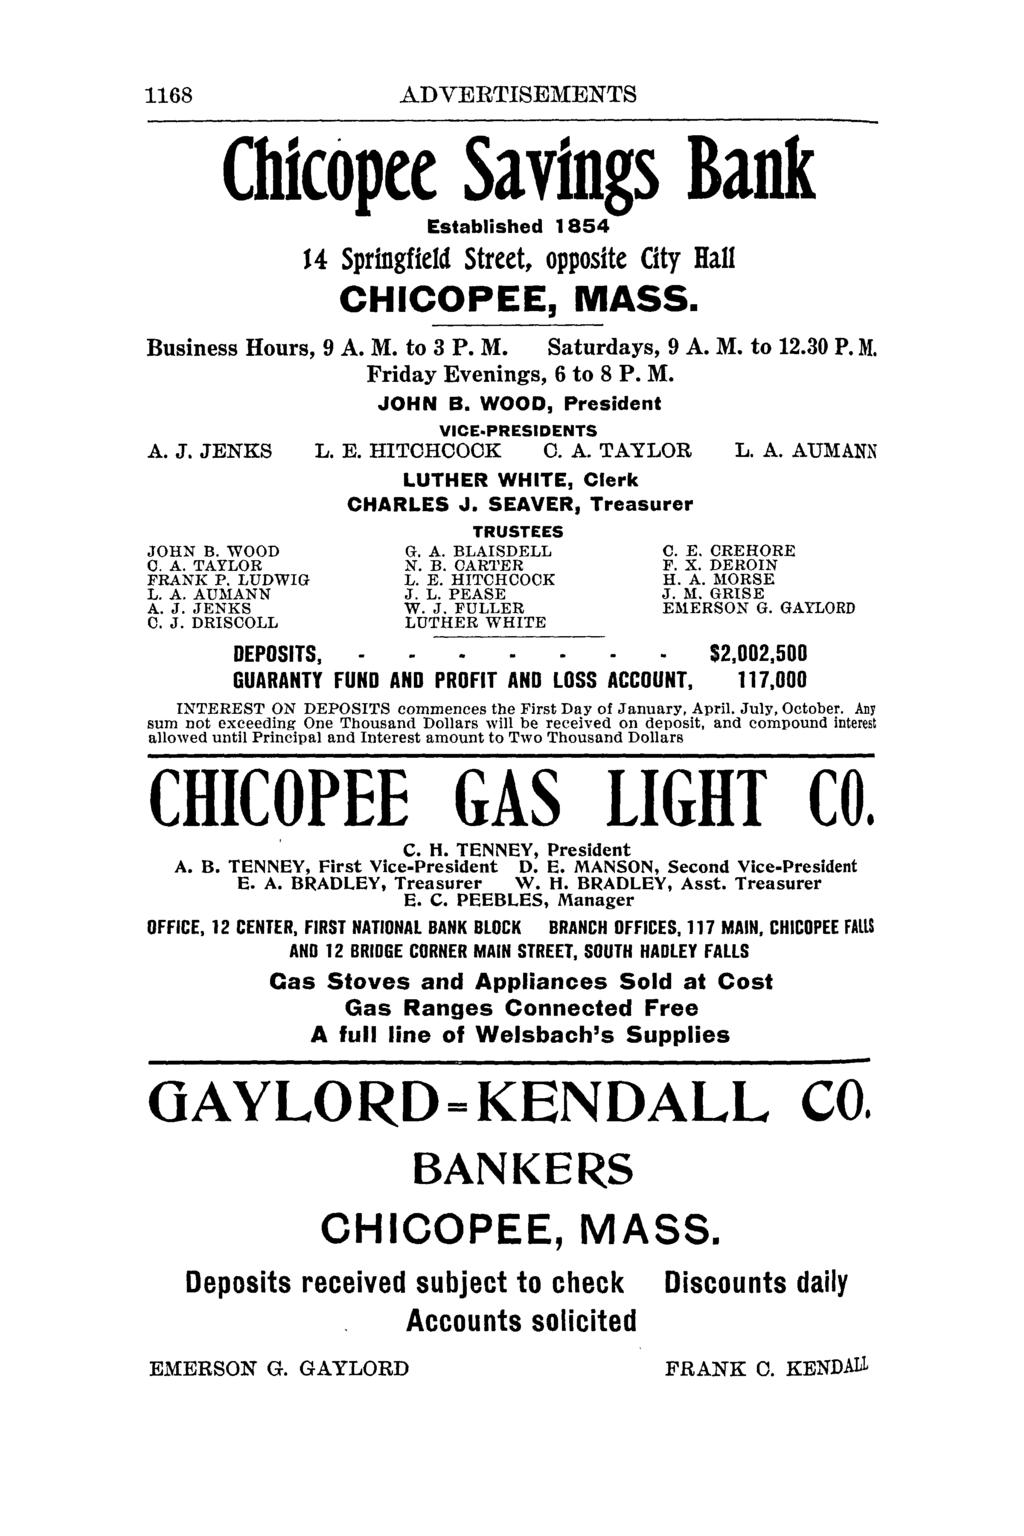 1168 ADVERTISEMENTS Chicopee Savings Bank Established 1854 14 Springfield Street, opposite City Hall CHICOPEE, MASS. Business Hours, 9 A. M. to 3 P. M. Saturdays, 9 A. M. to 12.30 P. M. Friday Evenings, 6 to 8 P.